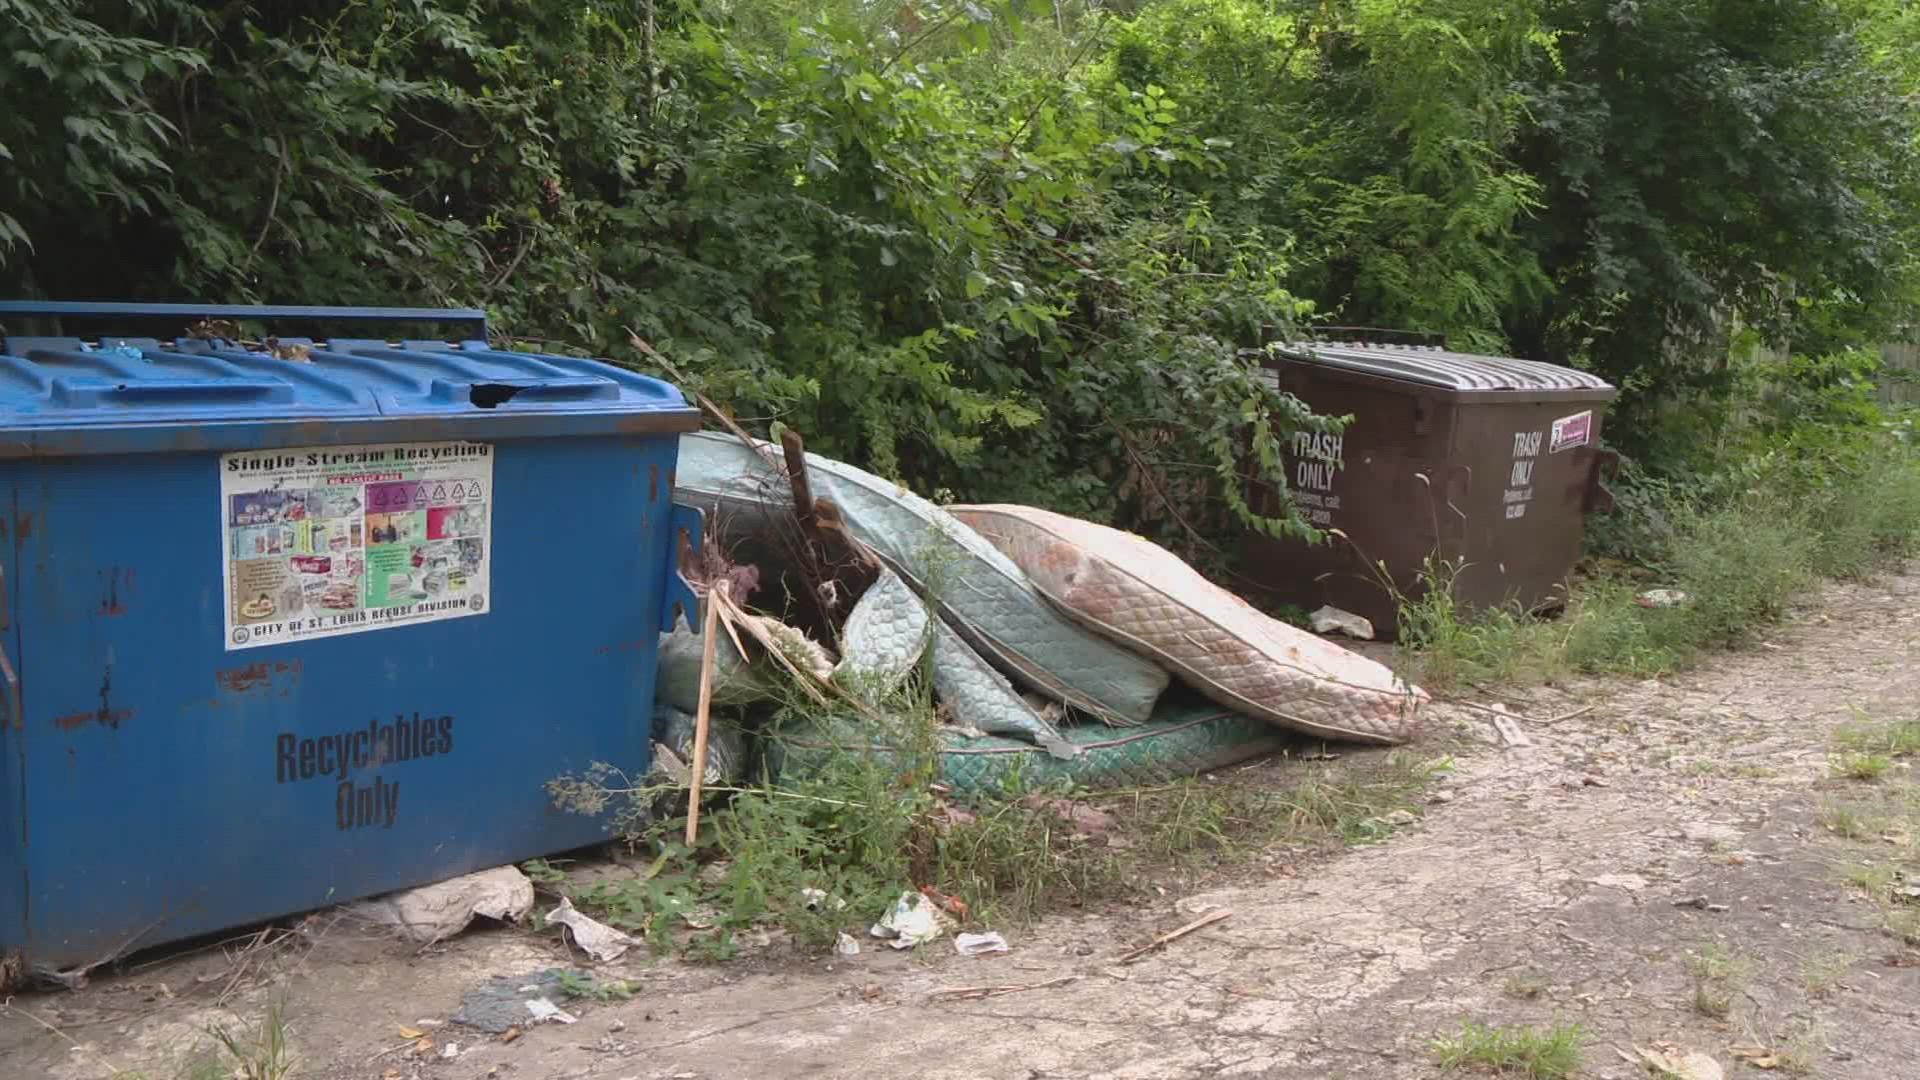 Residents say bulky trash has been piling up for months in St. Louis' 3rd ward. Illegal dumping has also increased and has been a problem in the area.